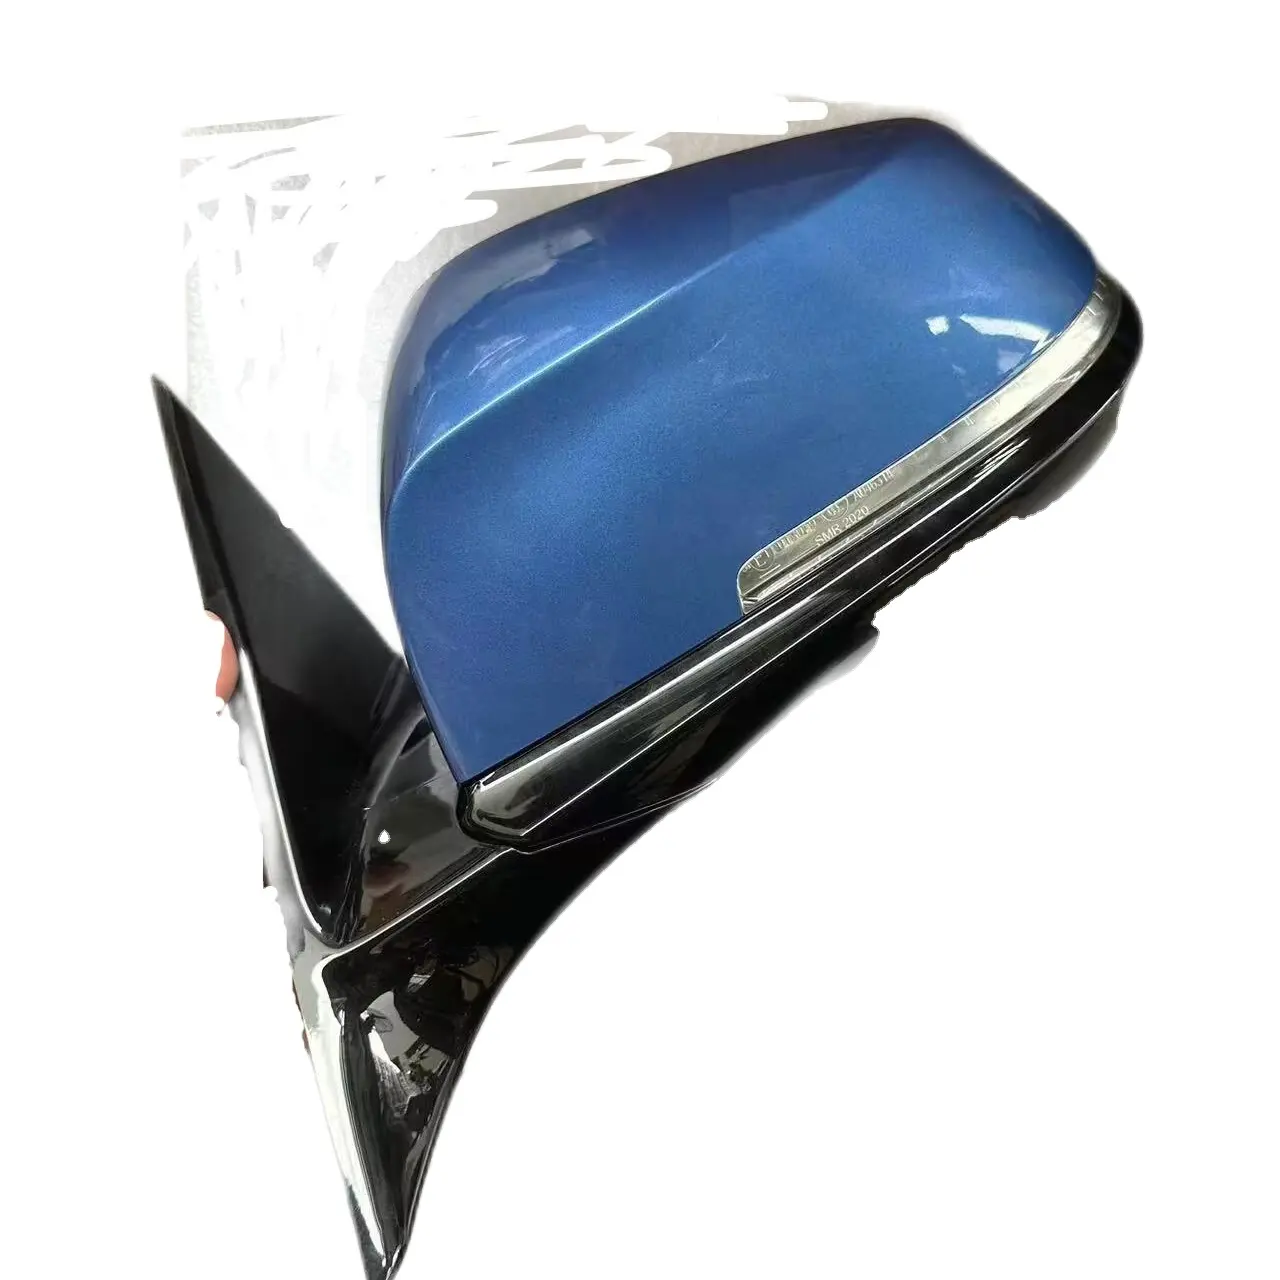 Applicable to Viano reflector Vito Linte 636 639 260 rearview mirror assembly